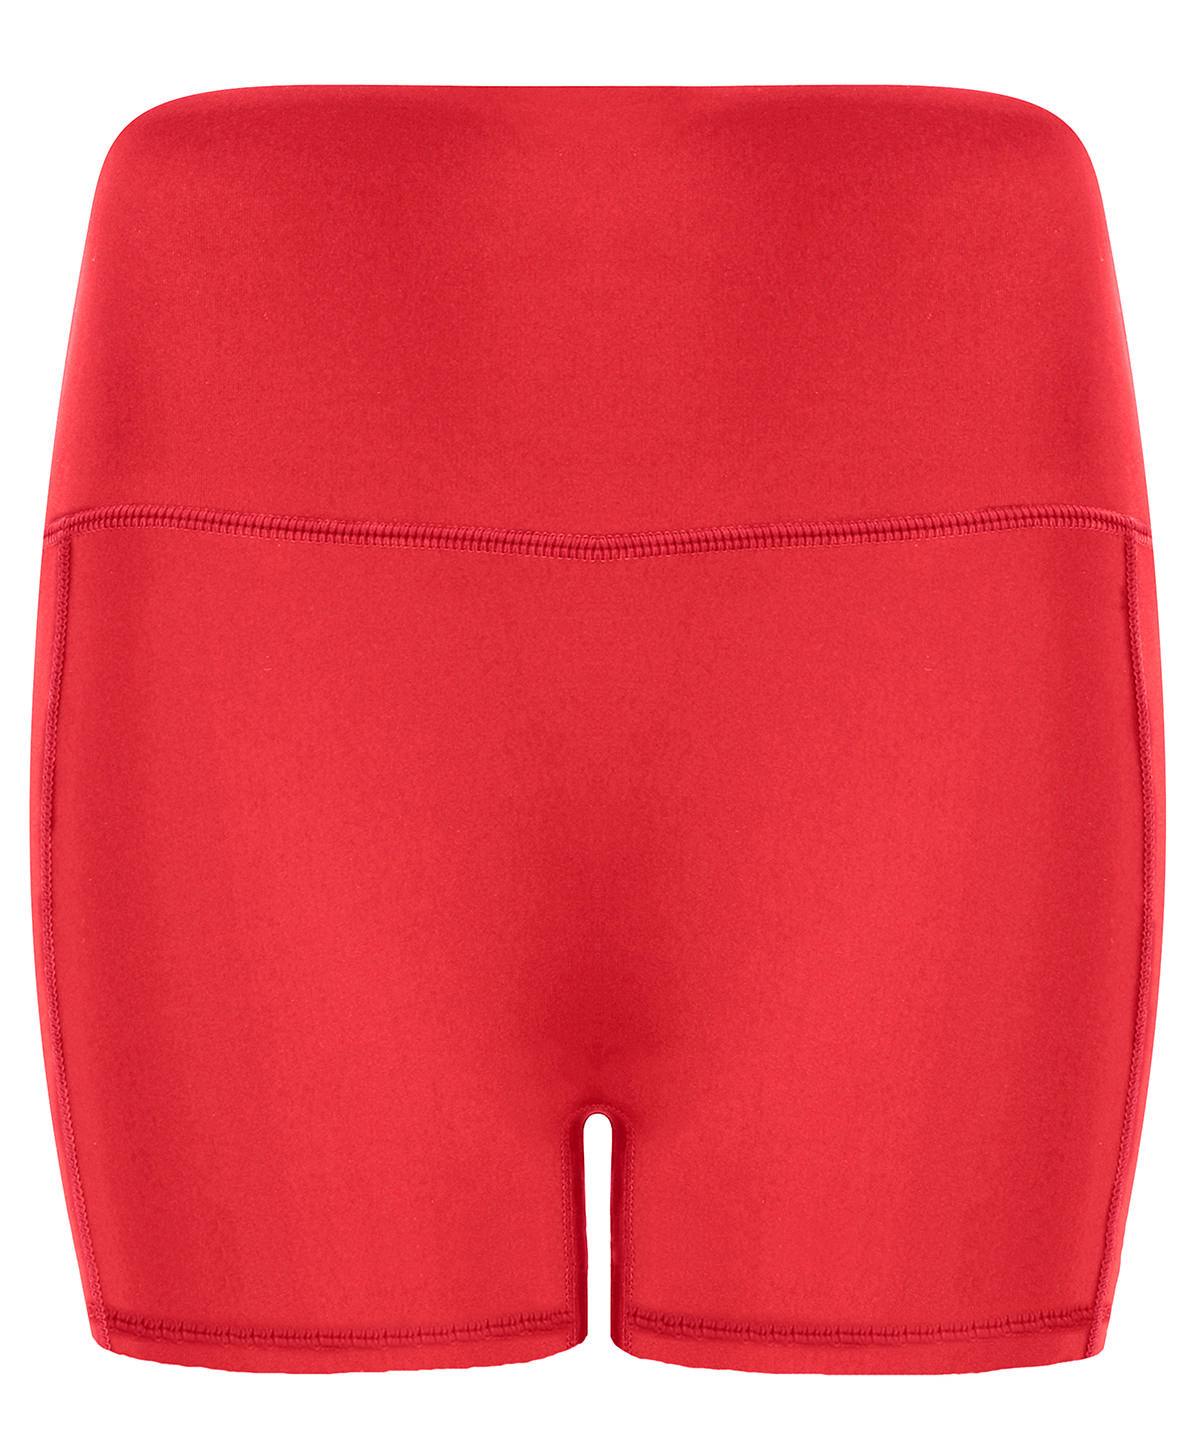 Hot Coral - Pocket shorts Shorts Tombo Activewear & Performance, Back to the Gym, New Styles For 2022, On-Trend Activewear, Trousers & Shorts, Women's Fashion Schoolwear Centres